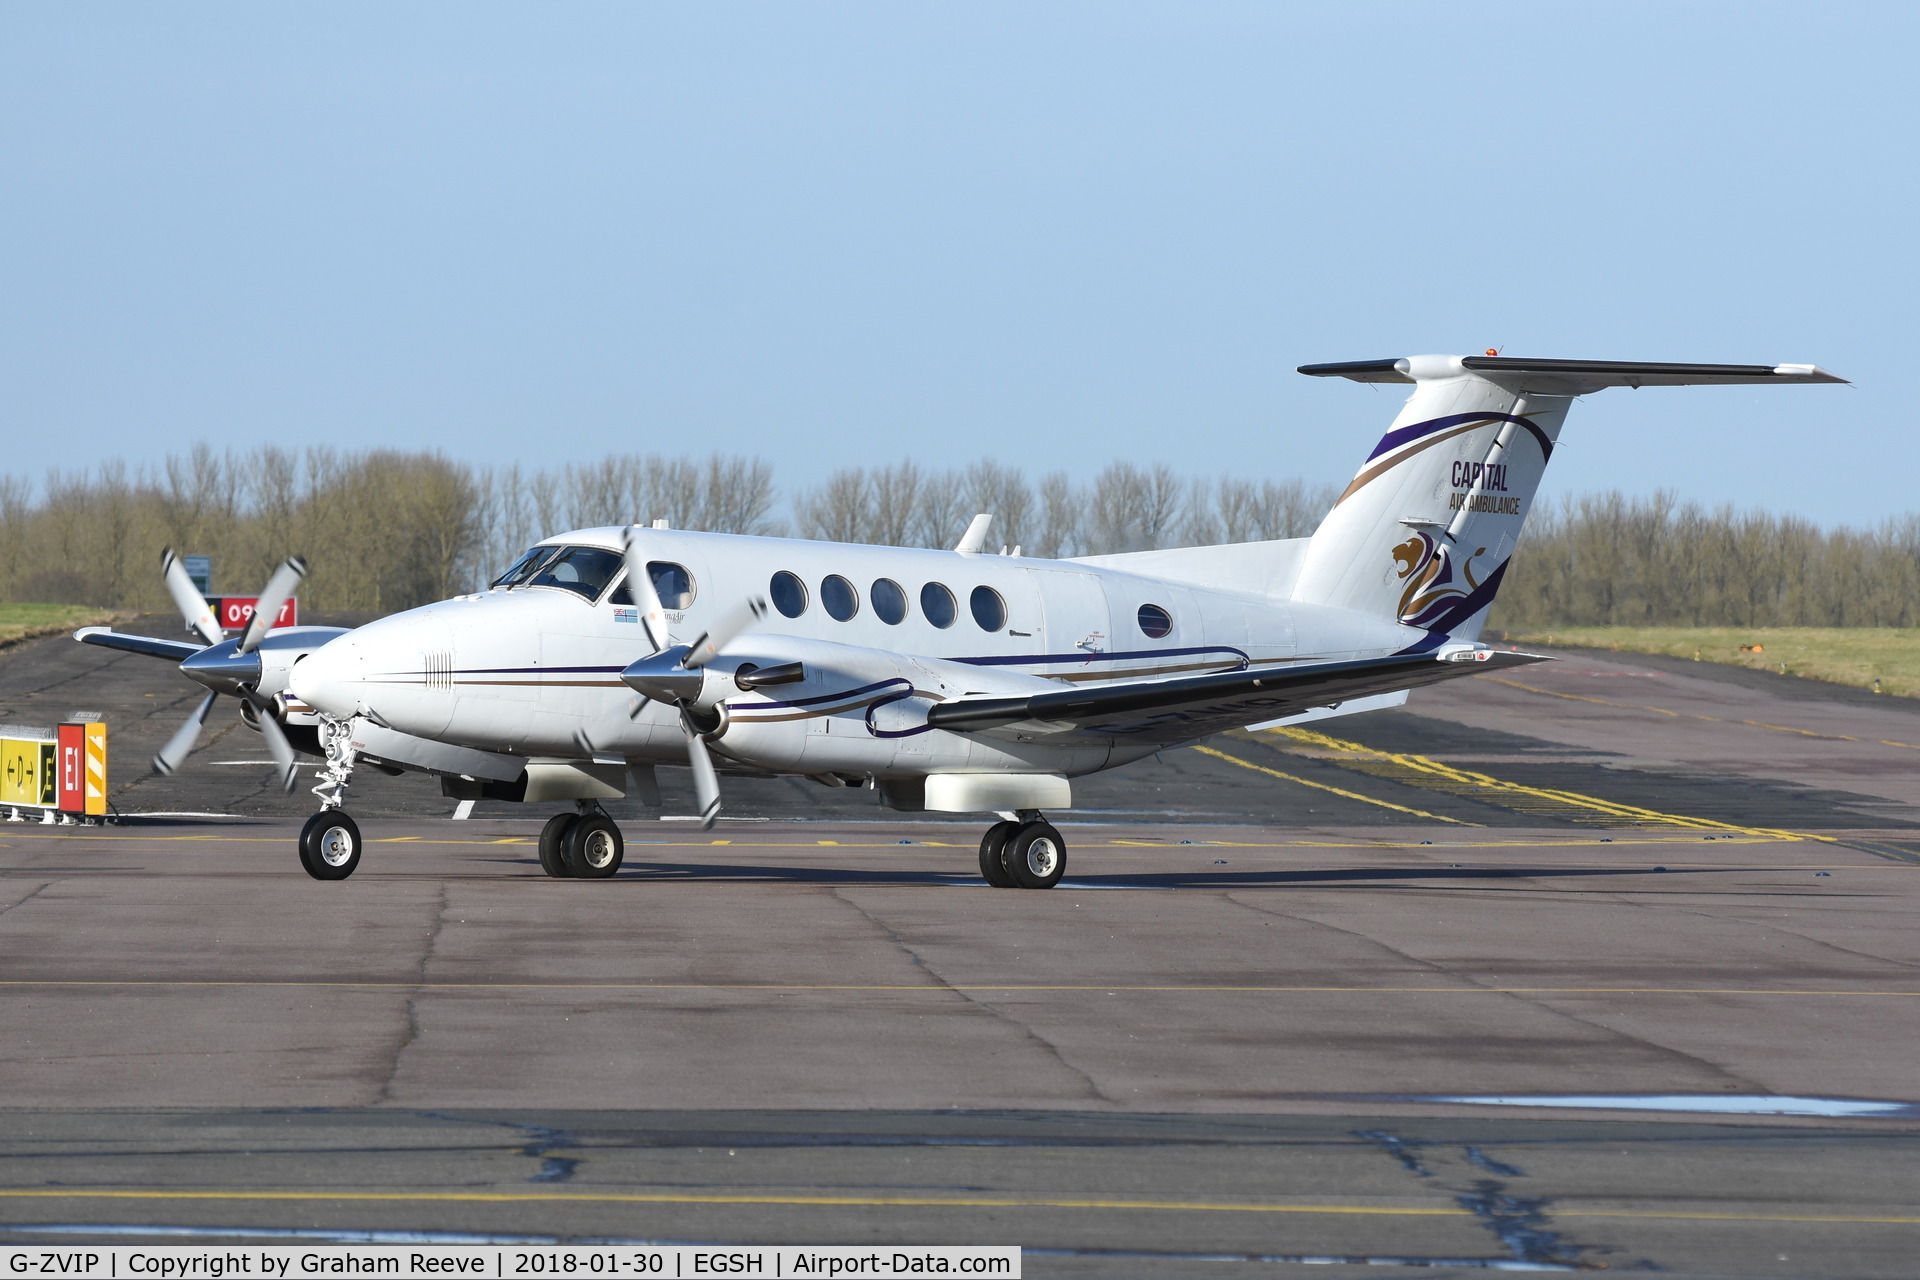 G-ZVIP, 1975 Beech 200 Super King Air C/N BB-108, Just landed at Norwich.